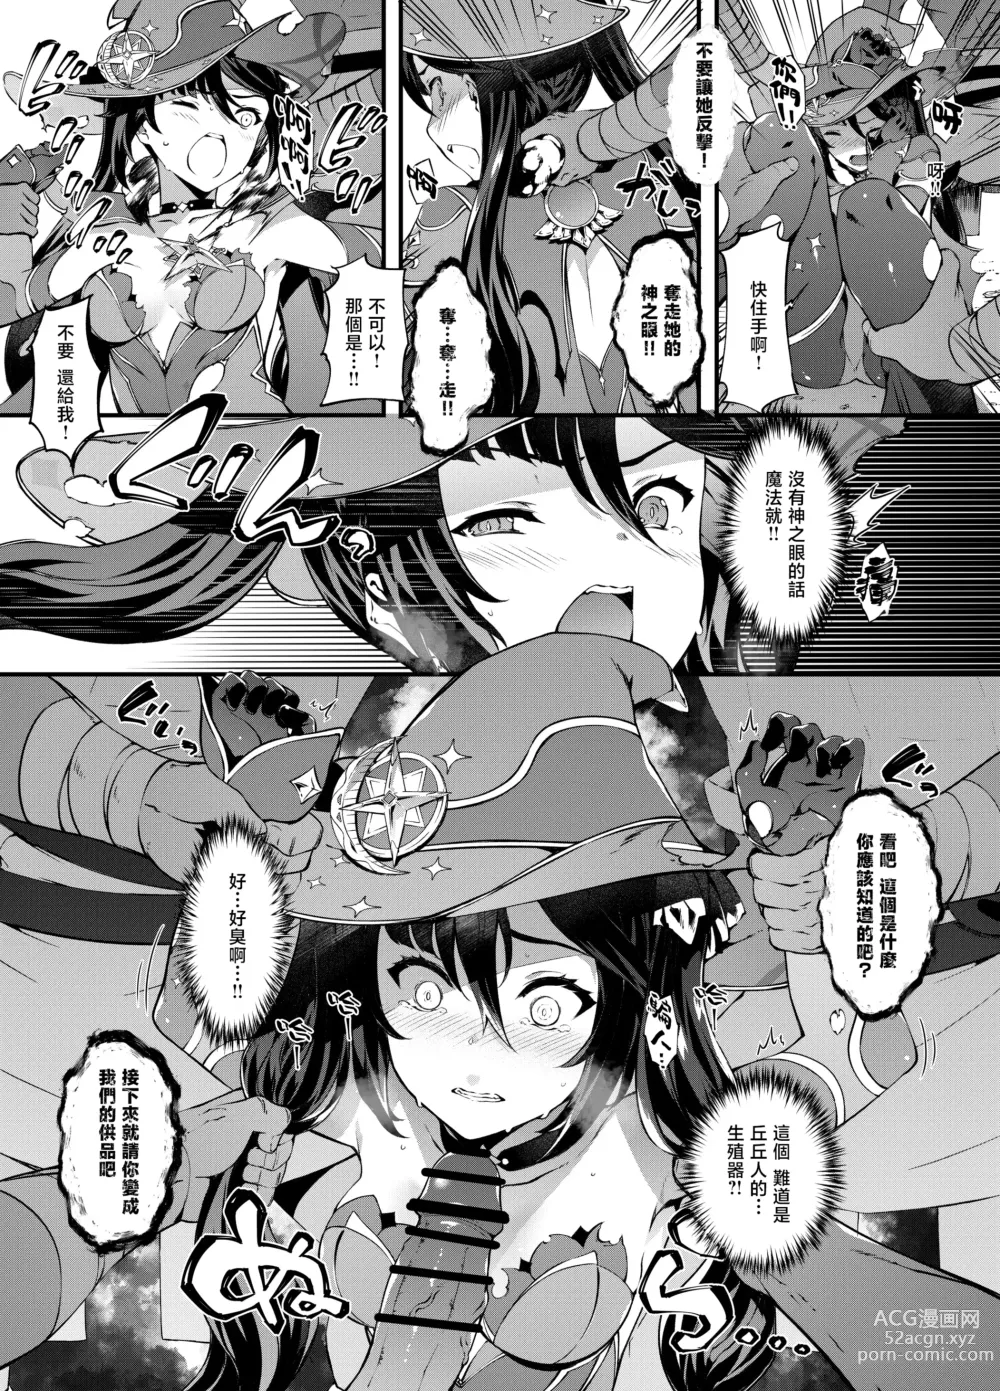 Page 11 of doujinshi 星辰坠落之日